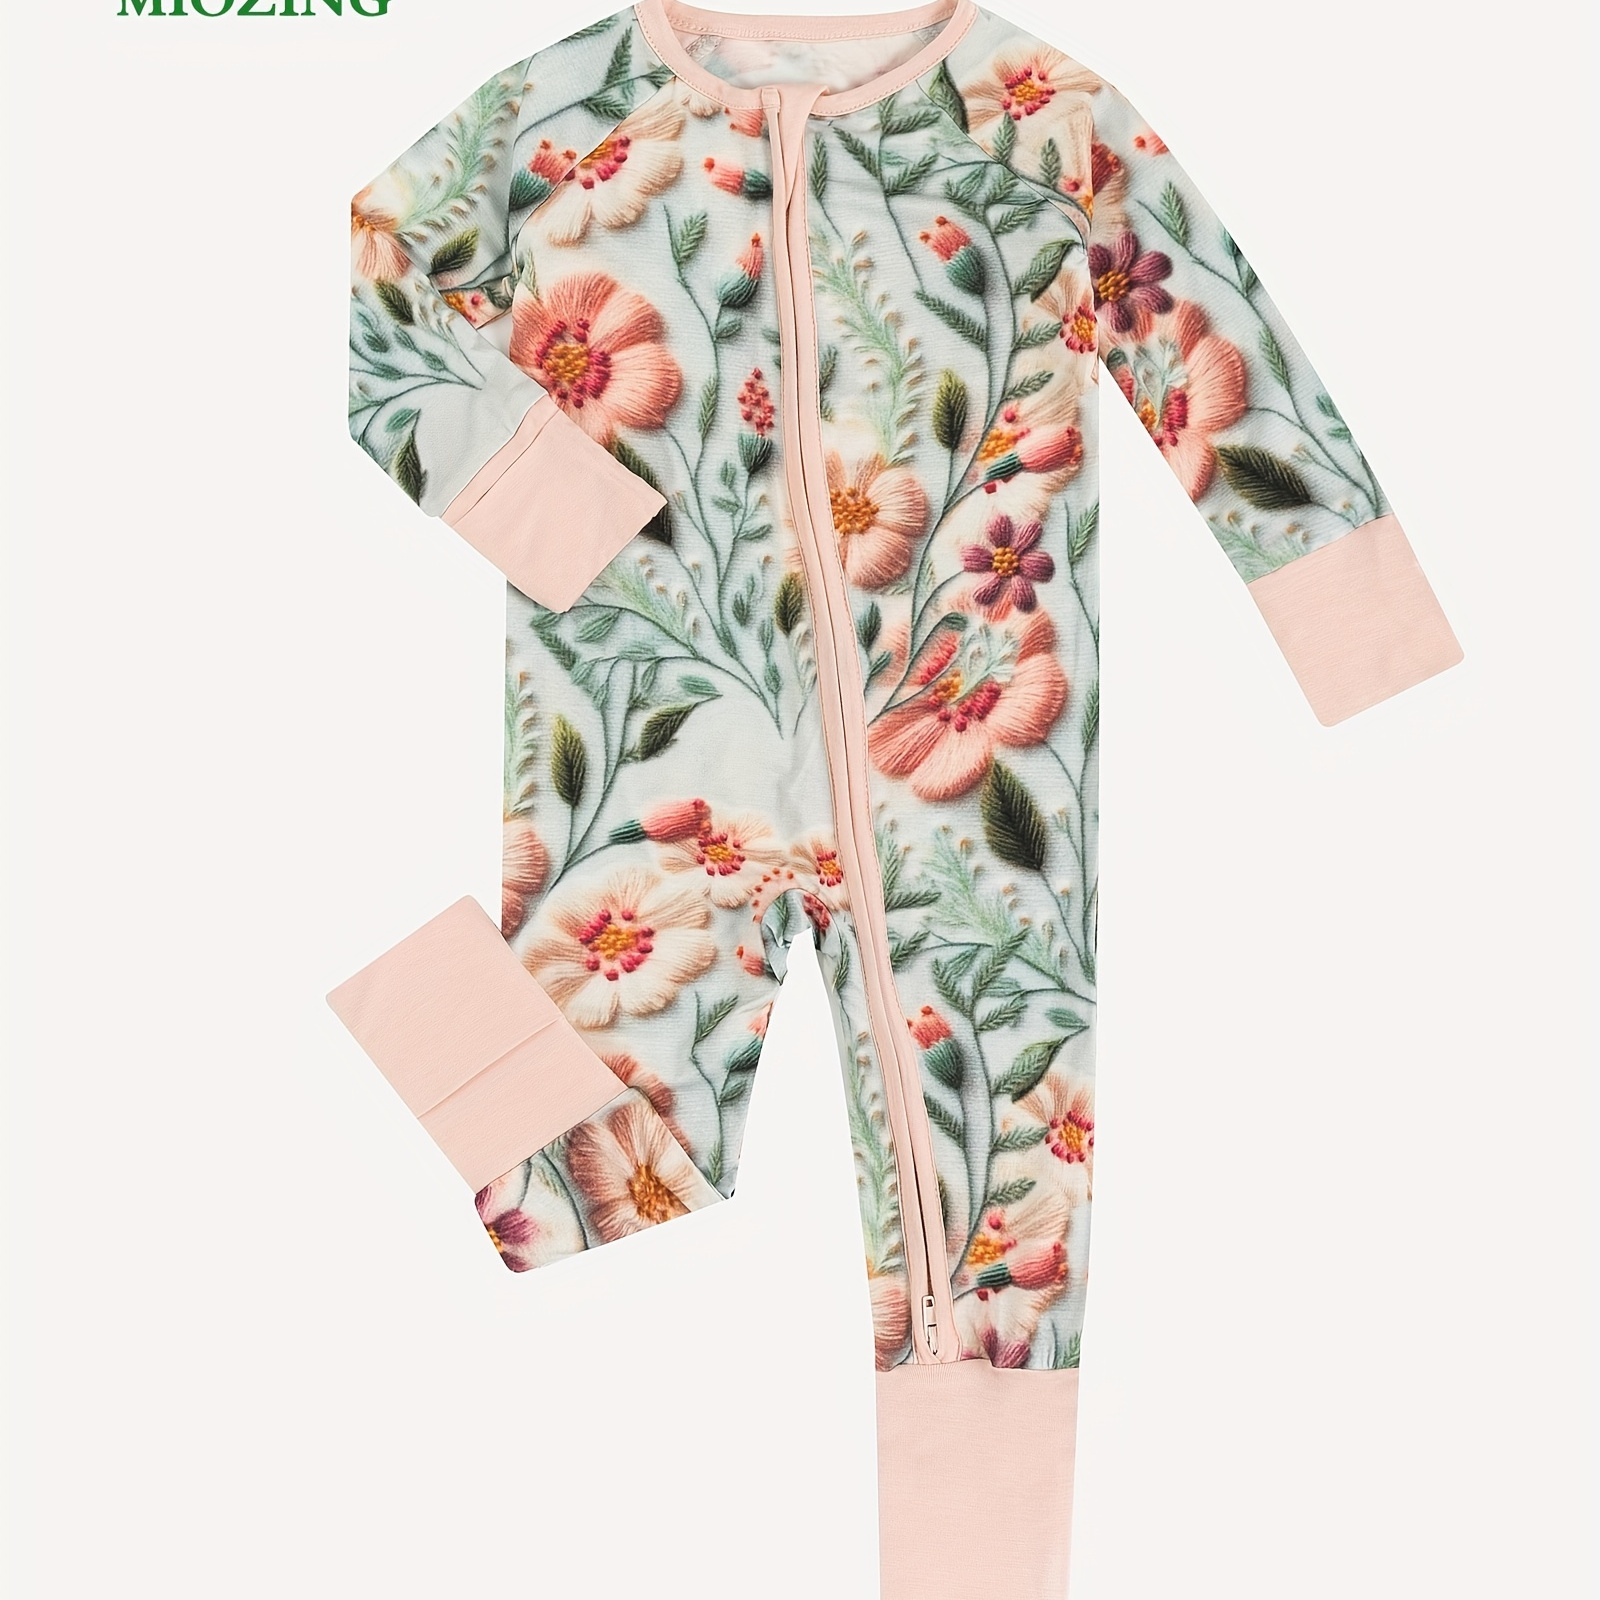 

Miozing Bamboo Fiber Bodysuit For Infants, Embroidered Floral Pattern Long Sleeve Onesie, Baby Girl's Clothing